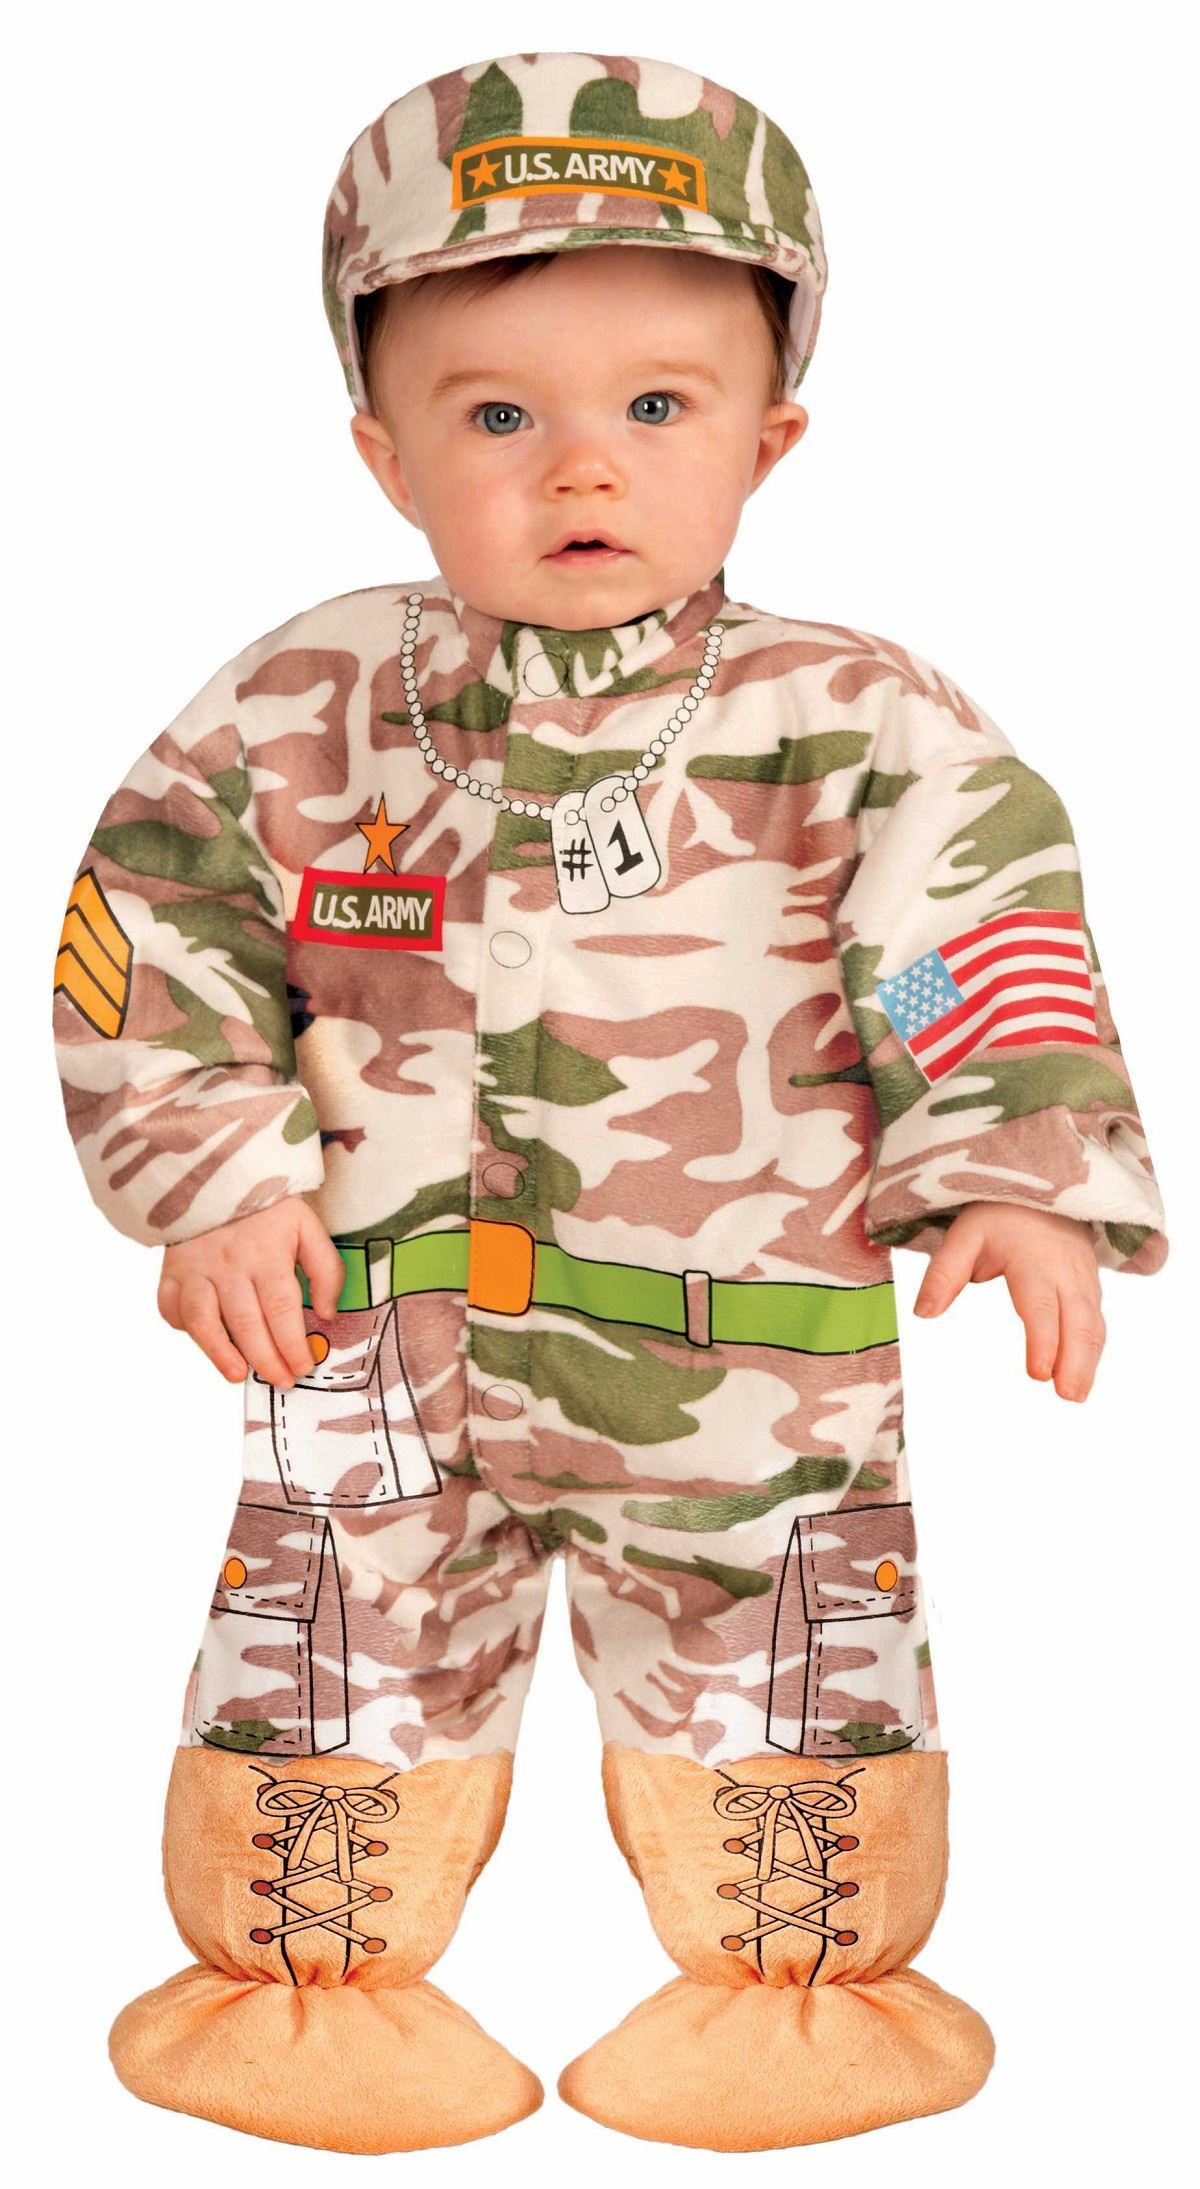 https://www.thecostumeland.com/images/zoom/fn72783-kids-army-soldier-toddler-halloween-costumes.jpg